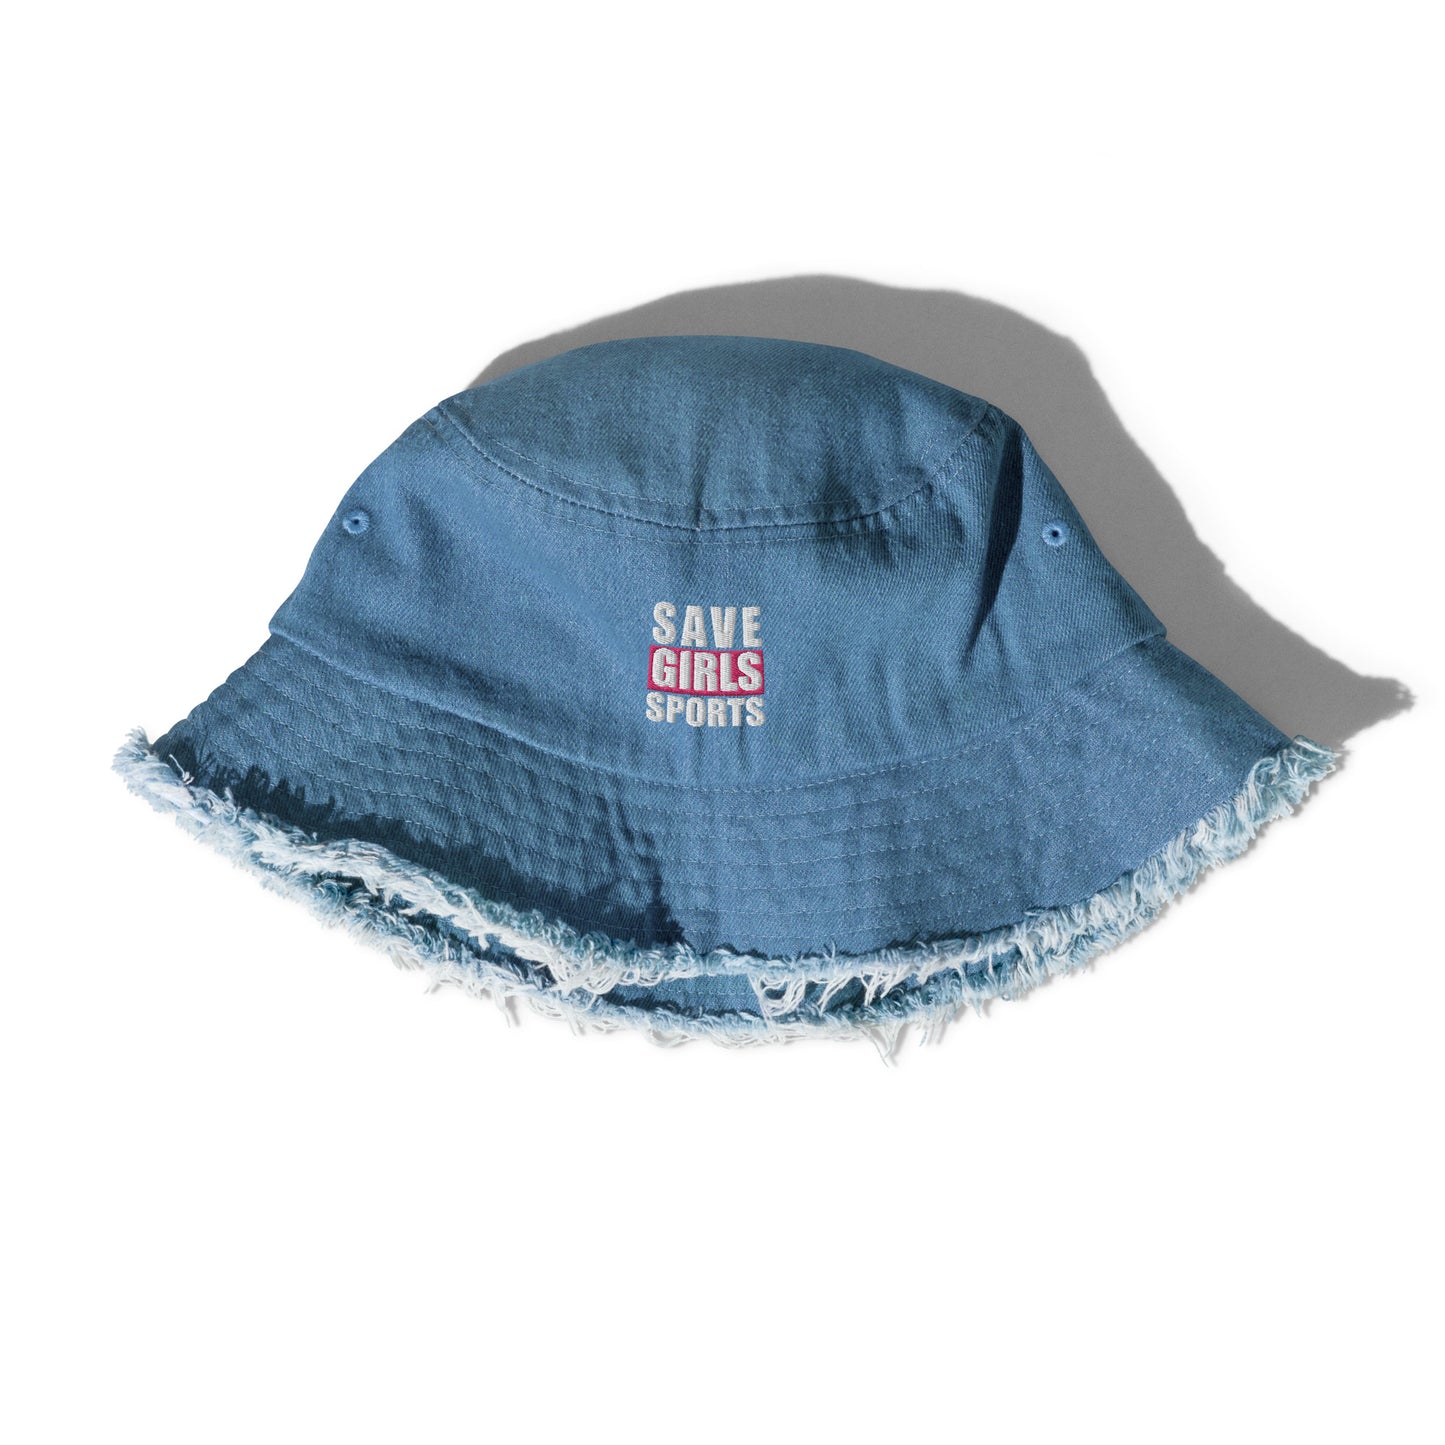 Save Girls Sports Embroidered Bucket Hat